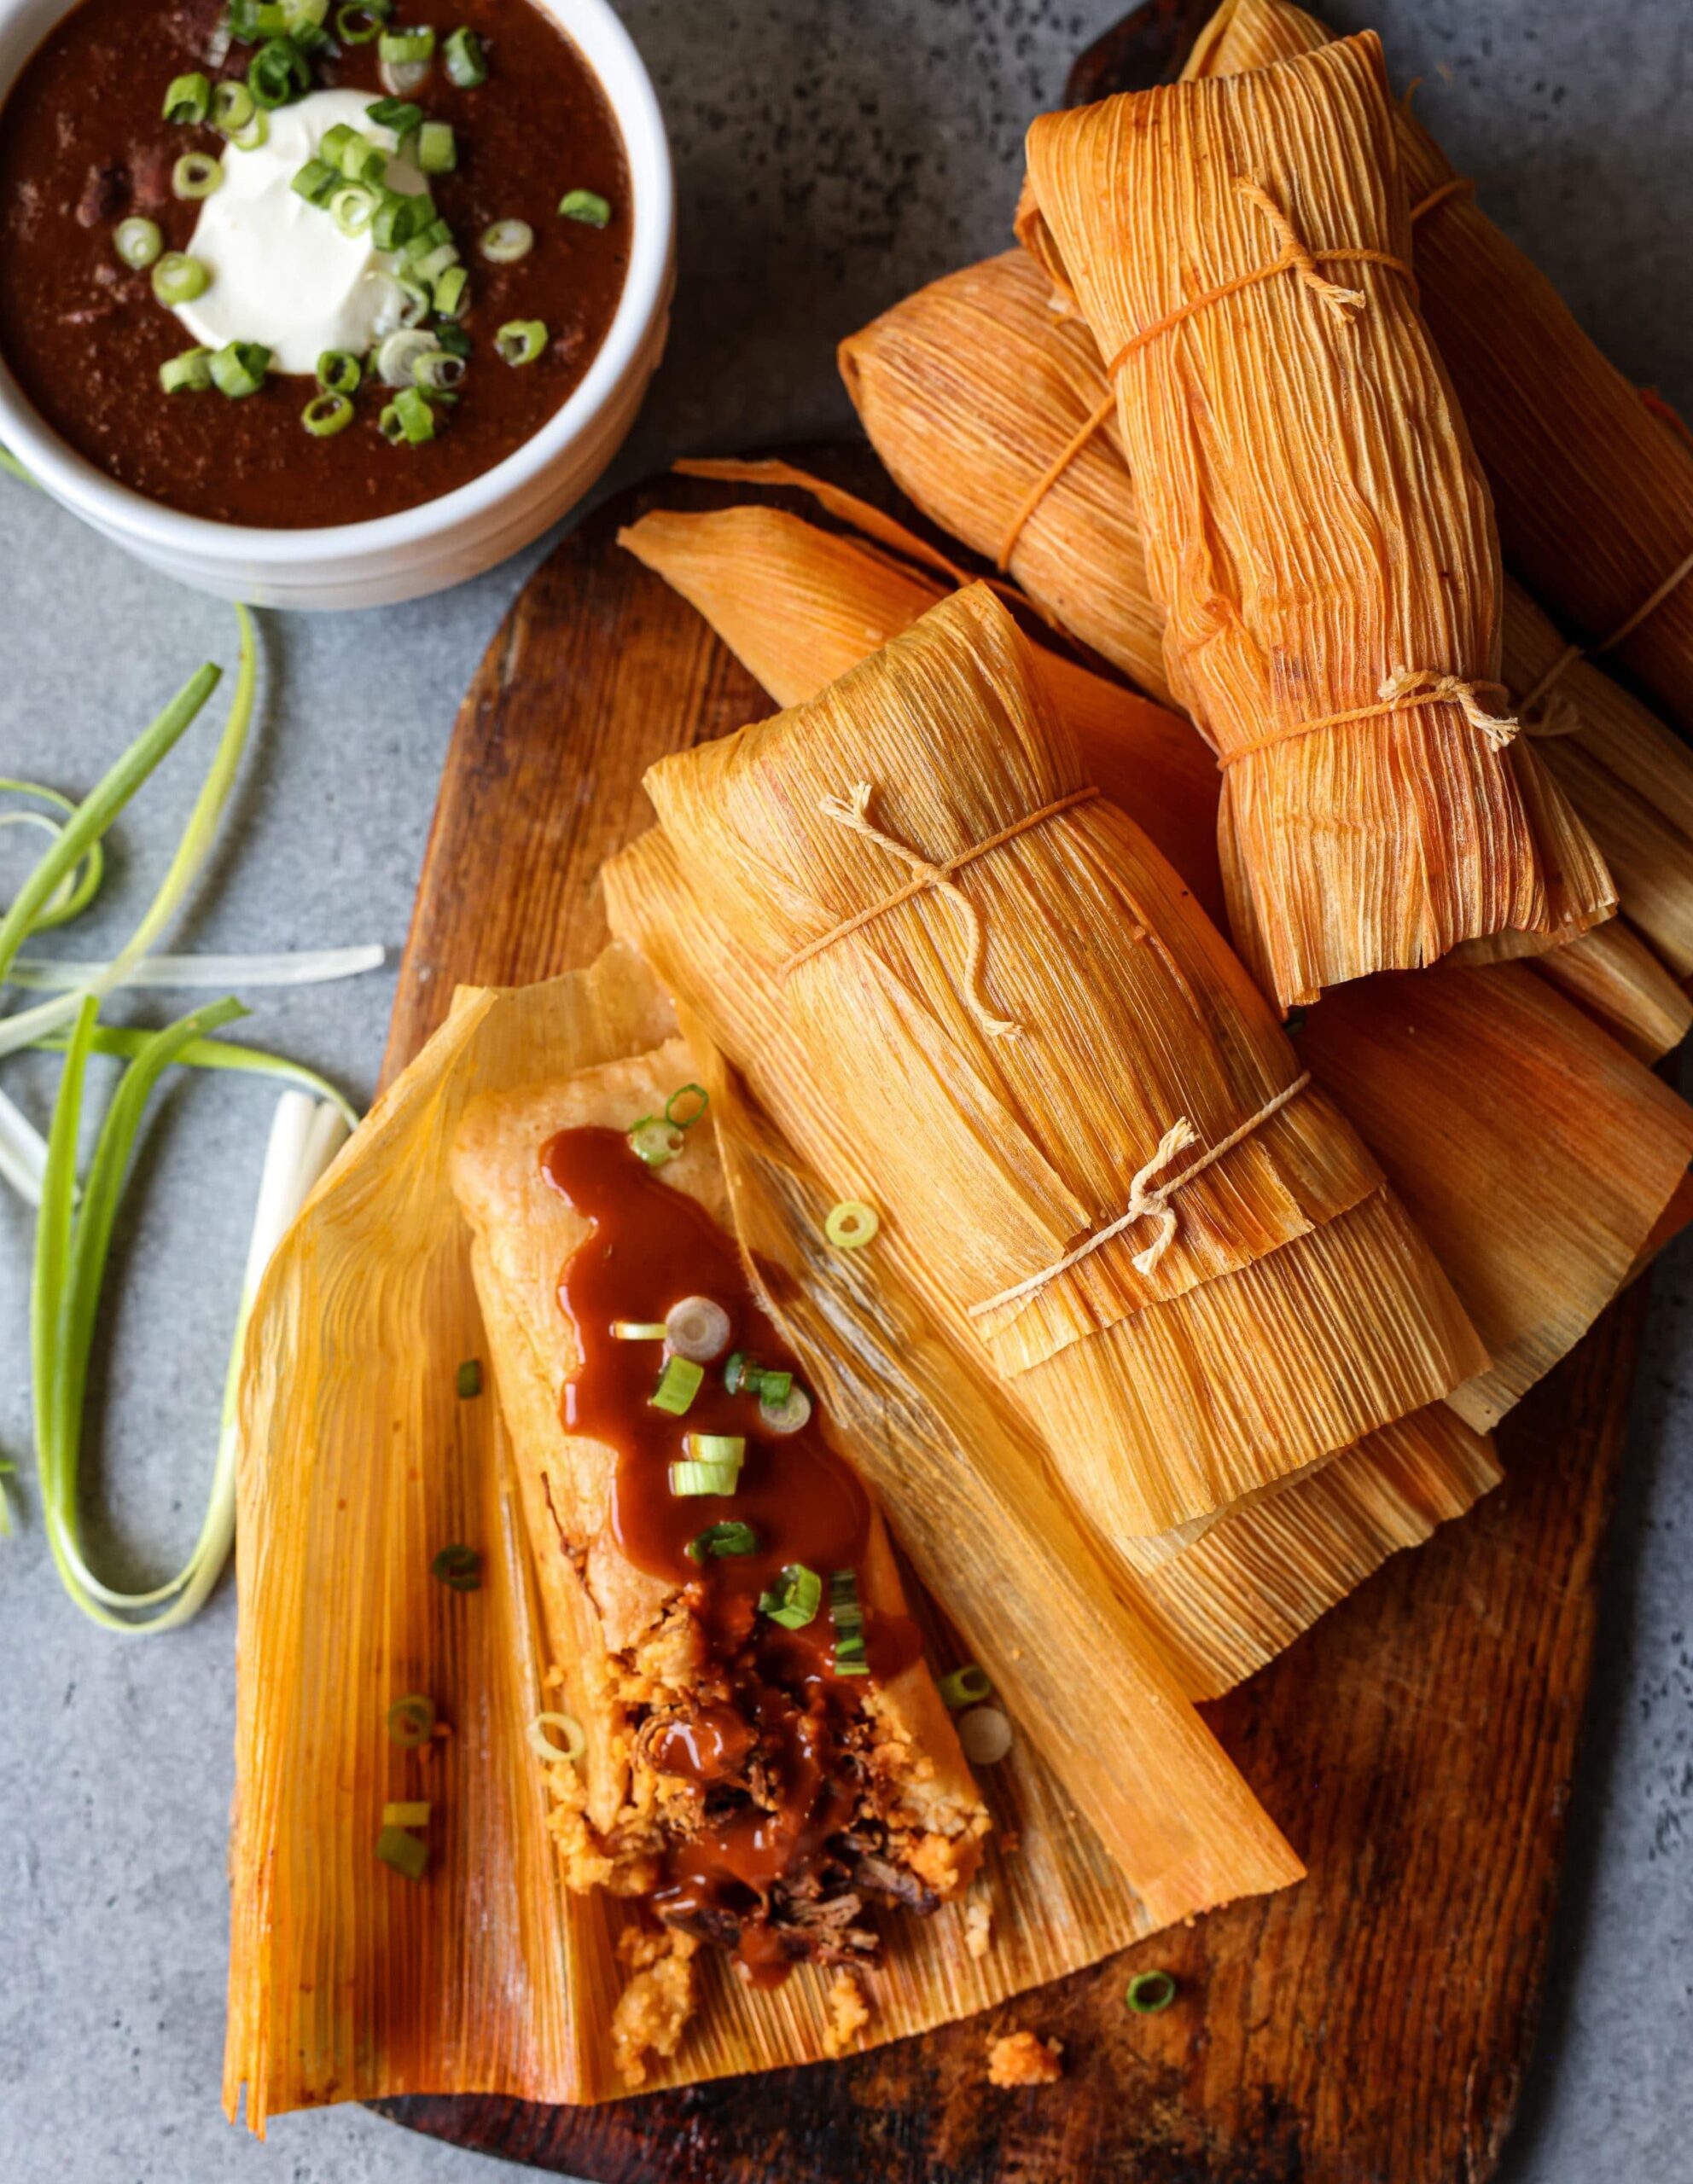  You can never go wrong with a plate of warm and comforting tamales.